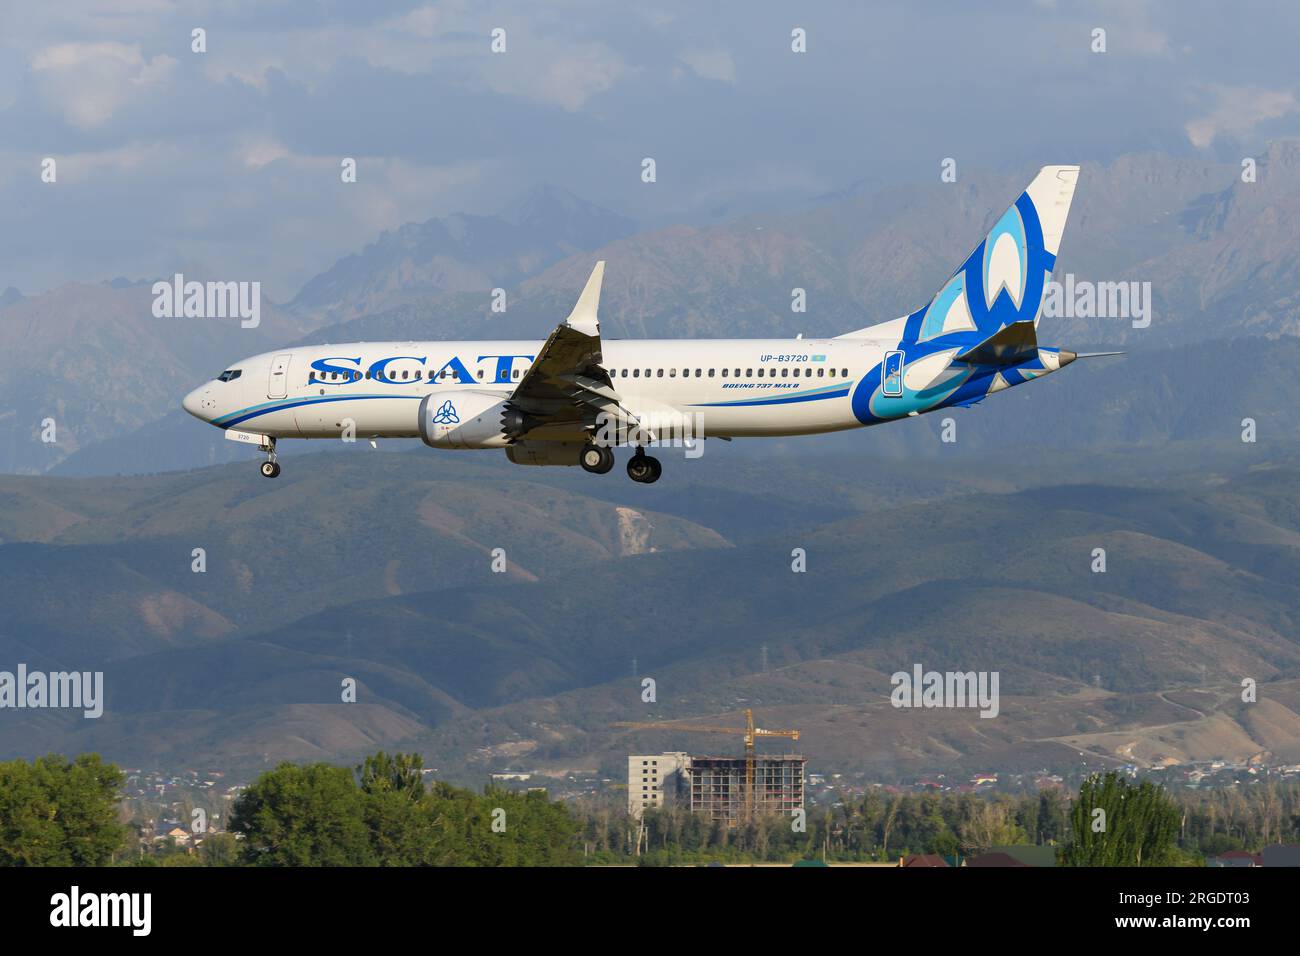 SCAT Airlines Boeing 737 aircraft landing in Almaty Airport in Kazakhstan. Airplane 737 MAX 8 of SCAT. Plane UP-B3720. Stock Photo